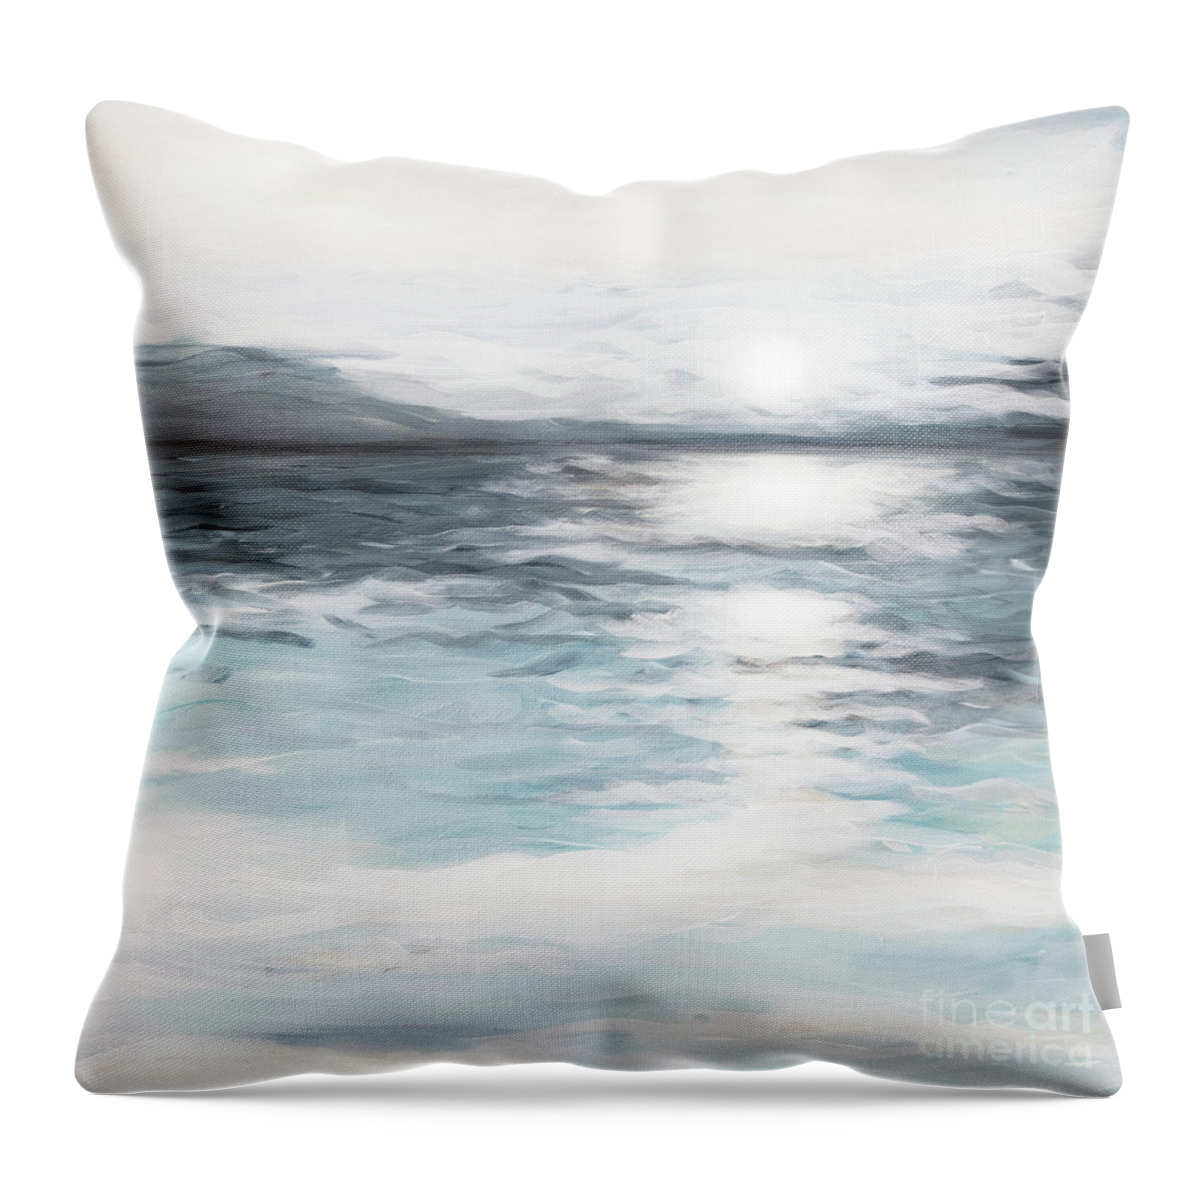 Impressionist Impressionistic Ocean Sunrise Soft Teal Indigo Blue White Reflection Throw Pillow featuring the painting Impression by Pamela Schwartz